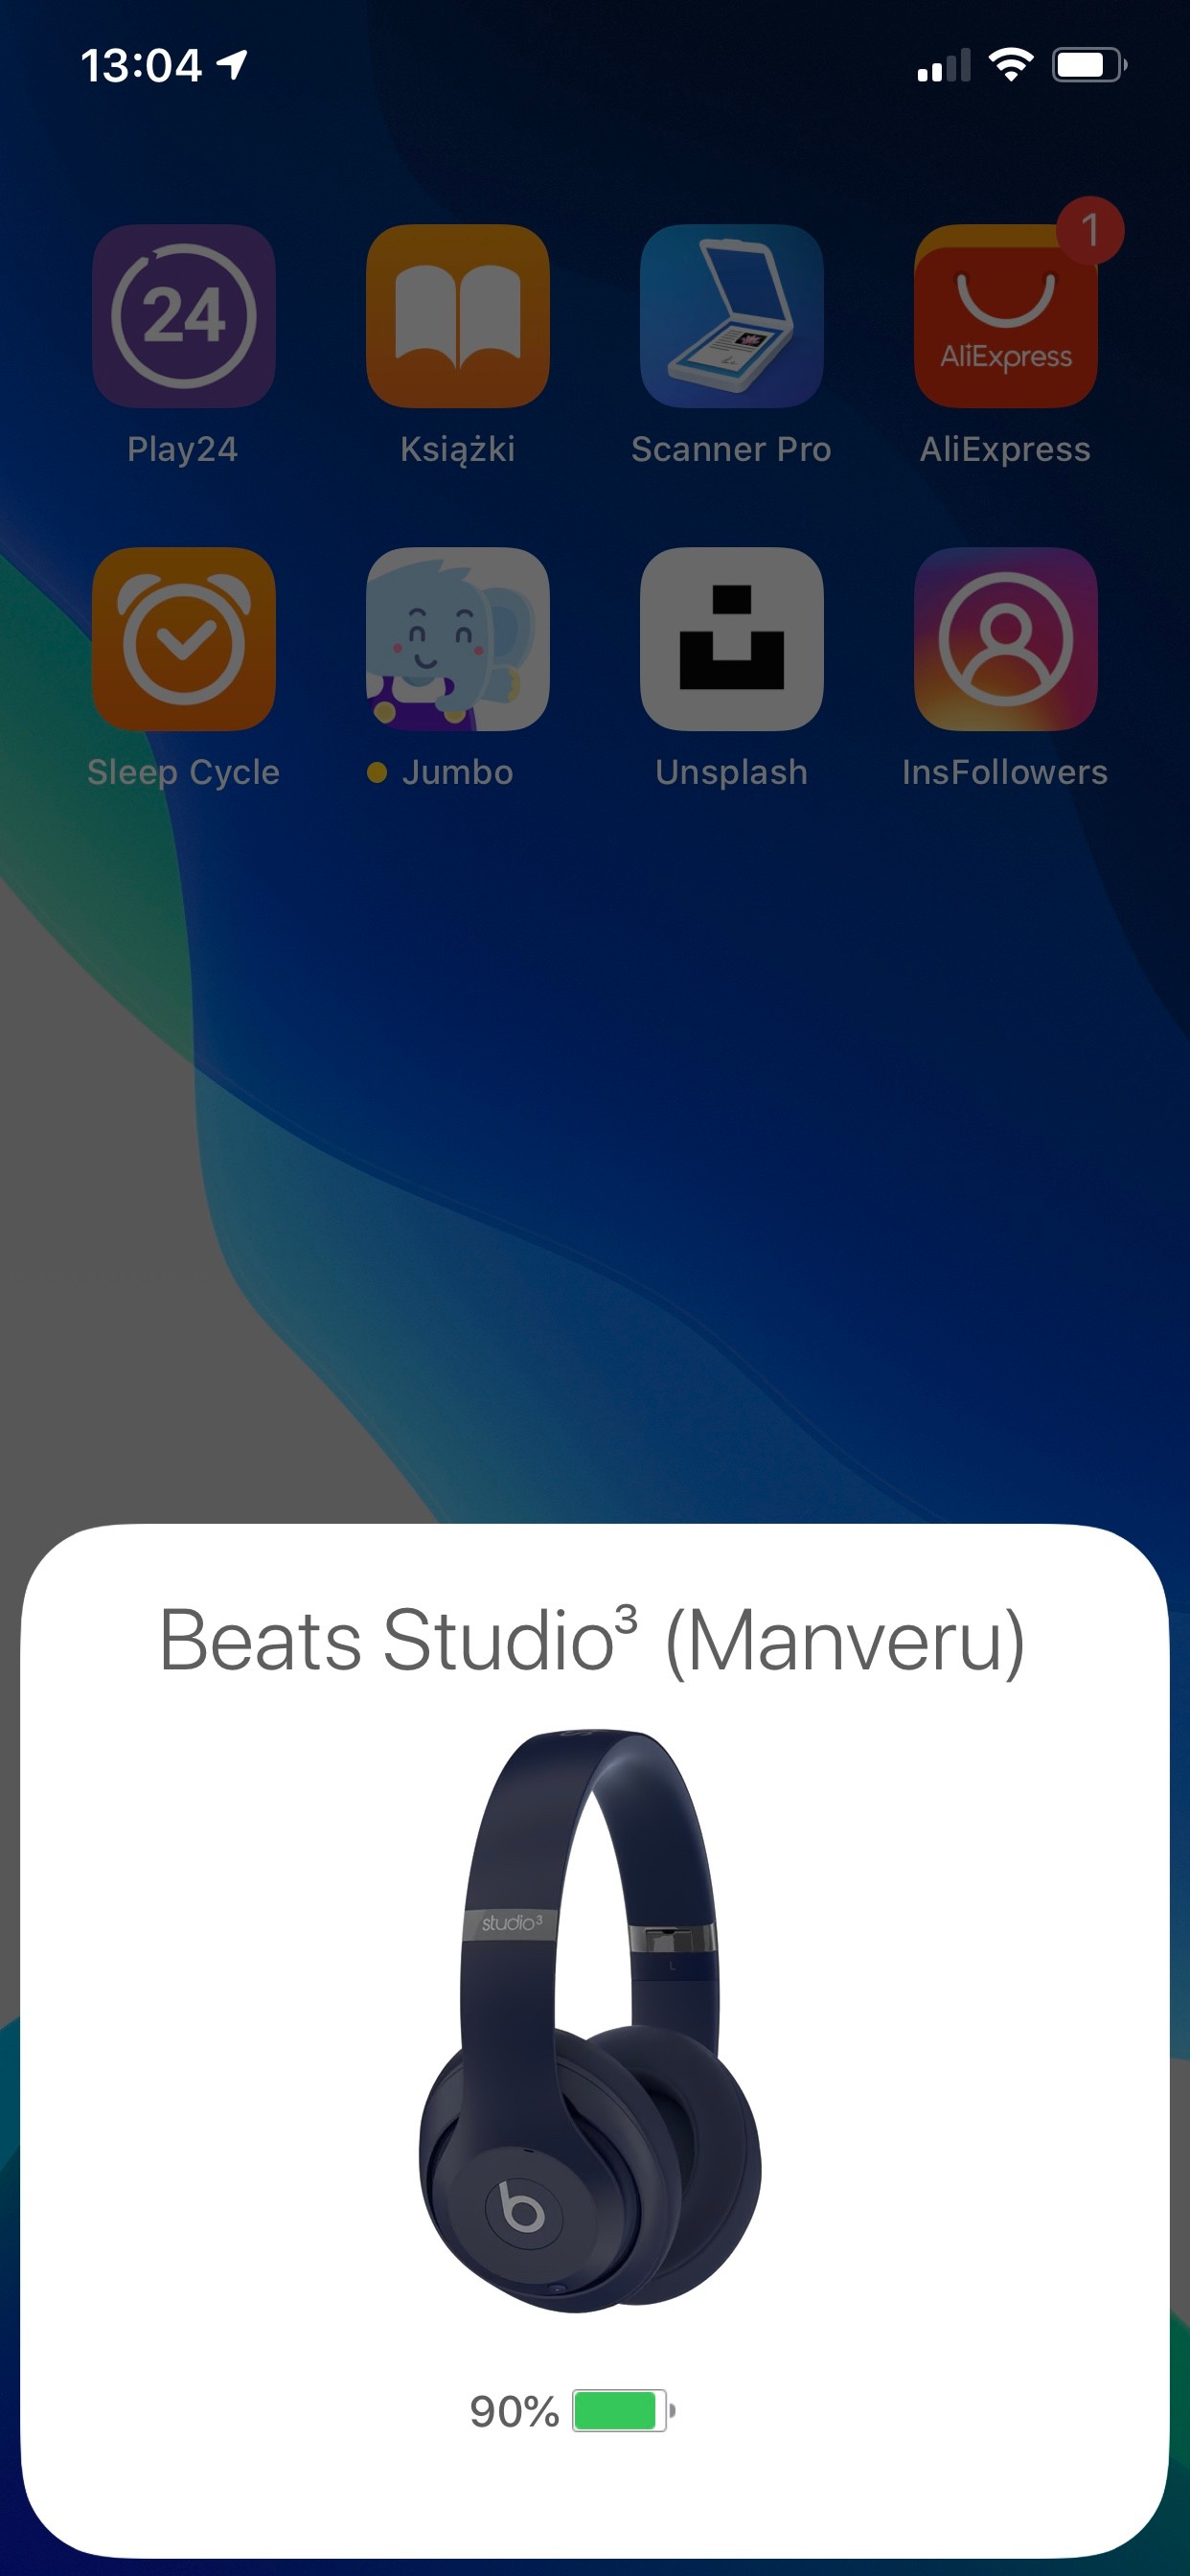 how to connect studio 3 beats to iphone